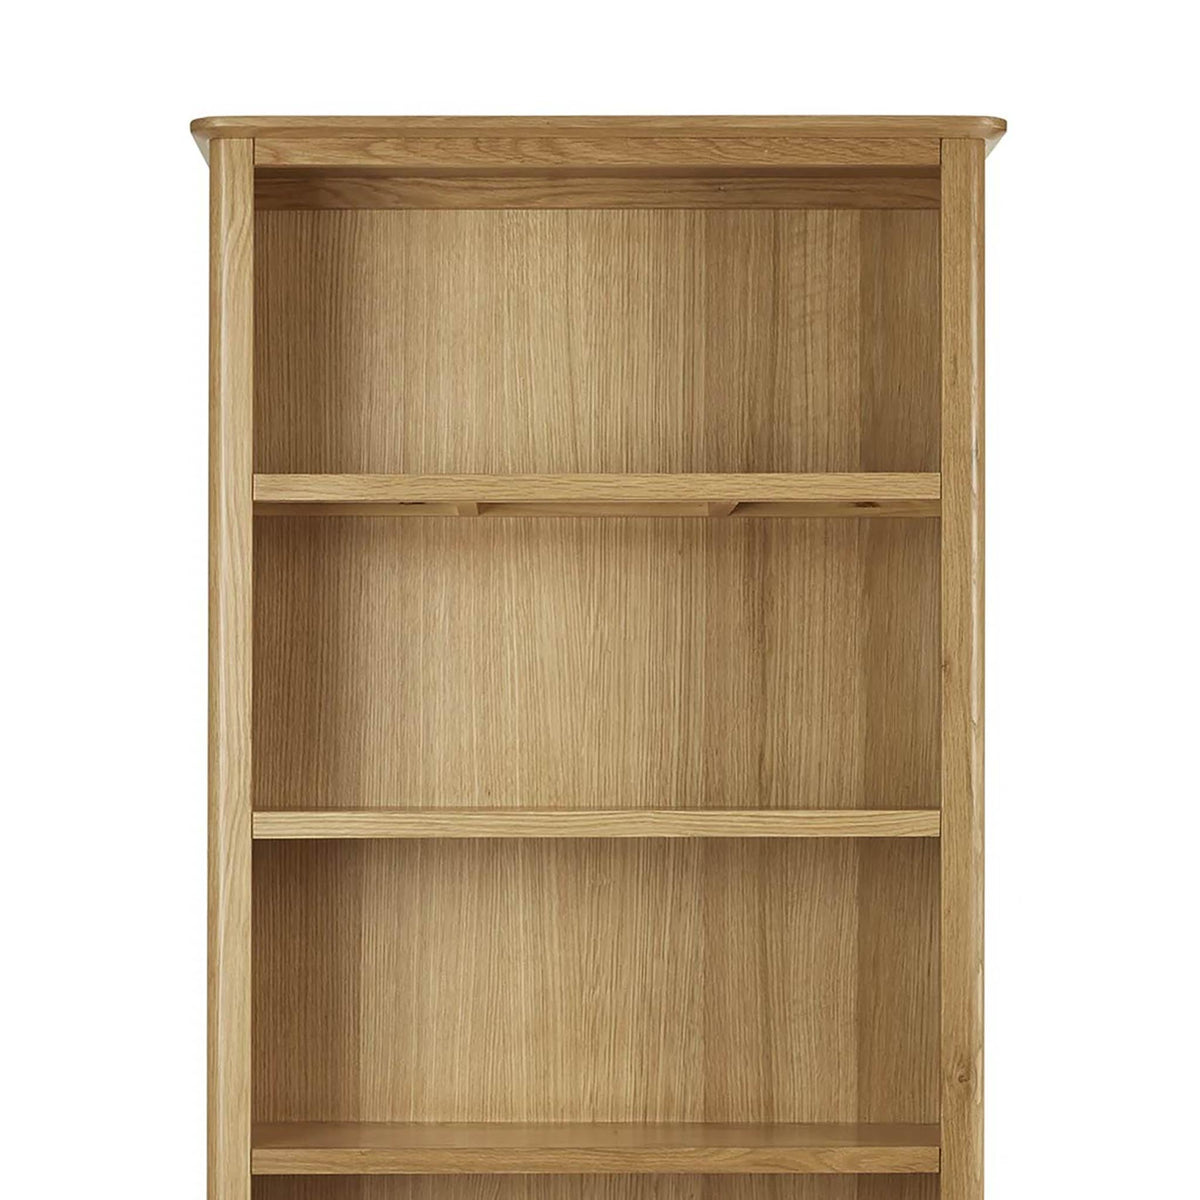 Alba Oak Large Bookcase - Close up of top of bookcase